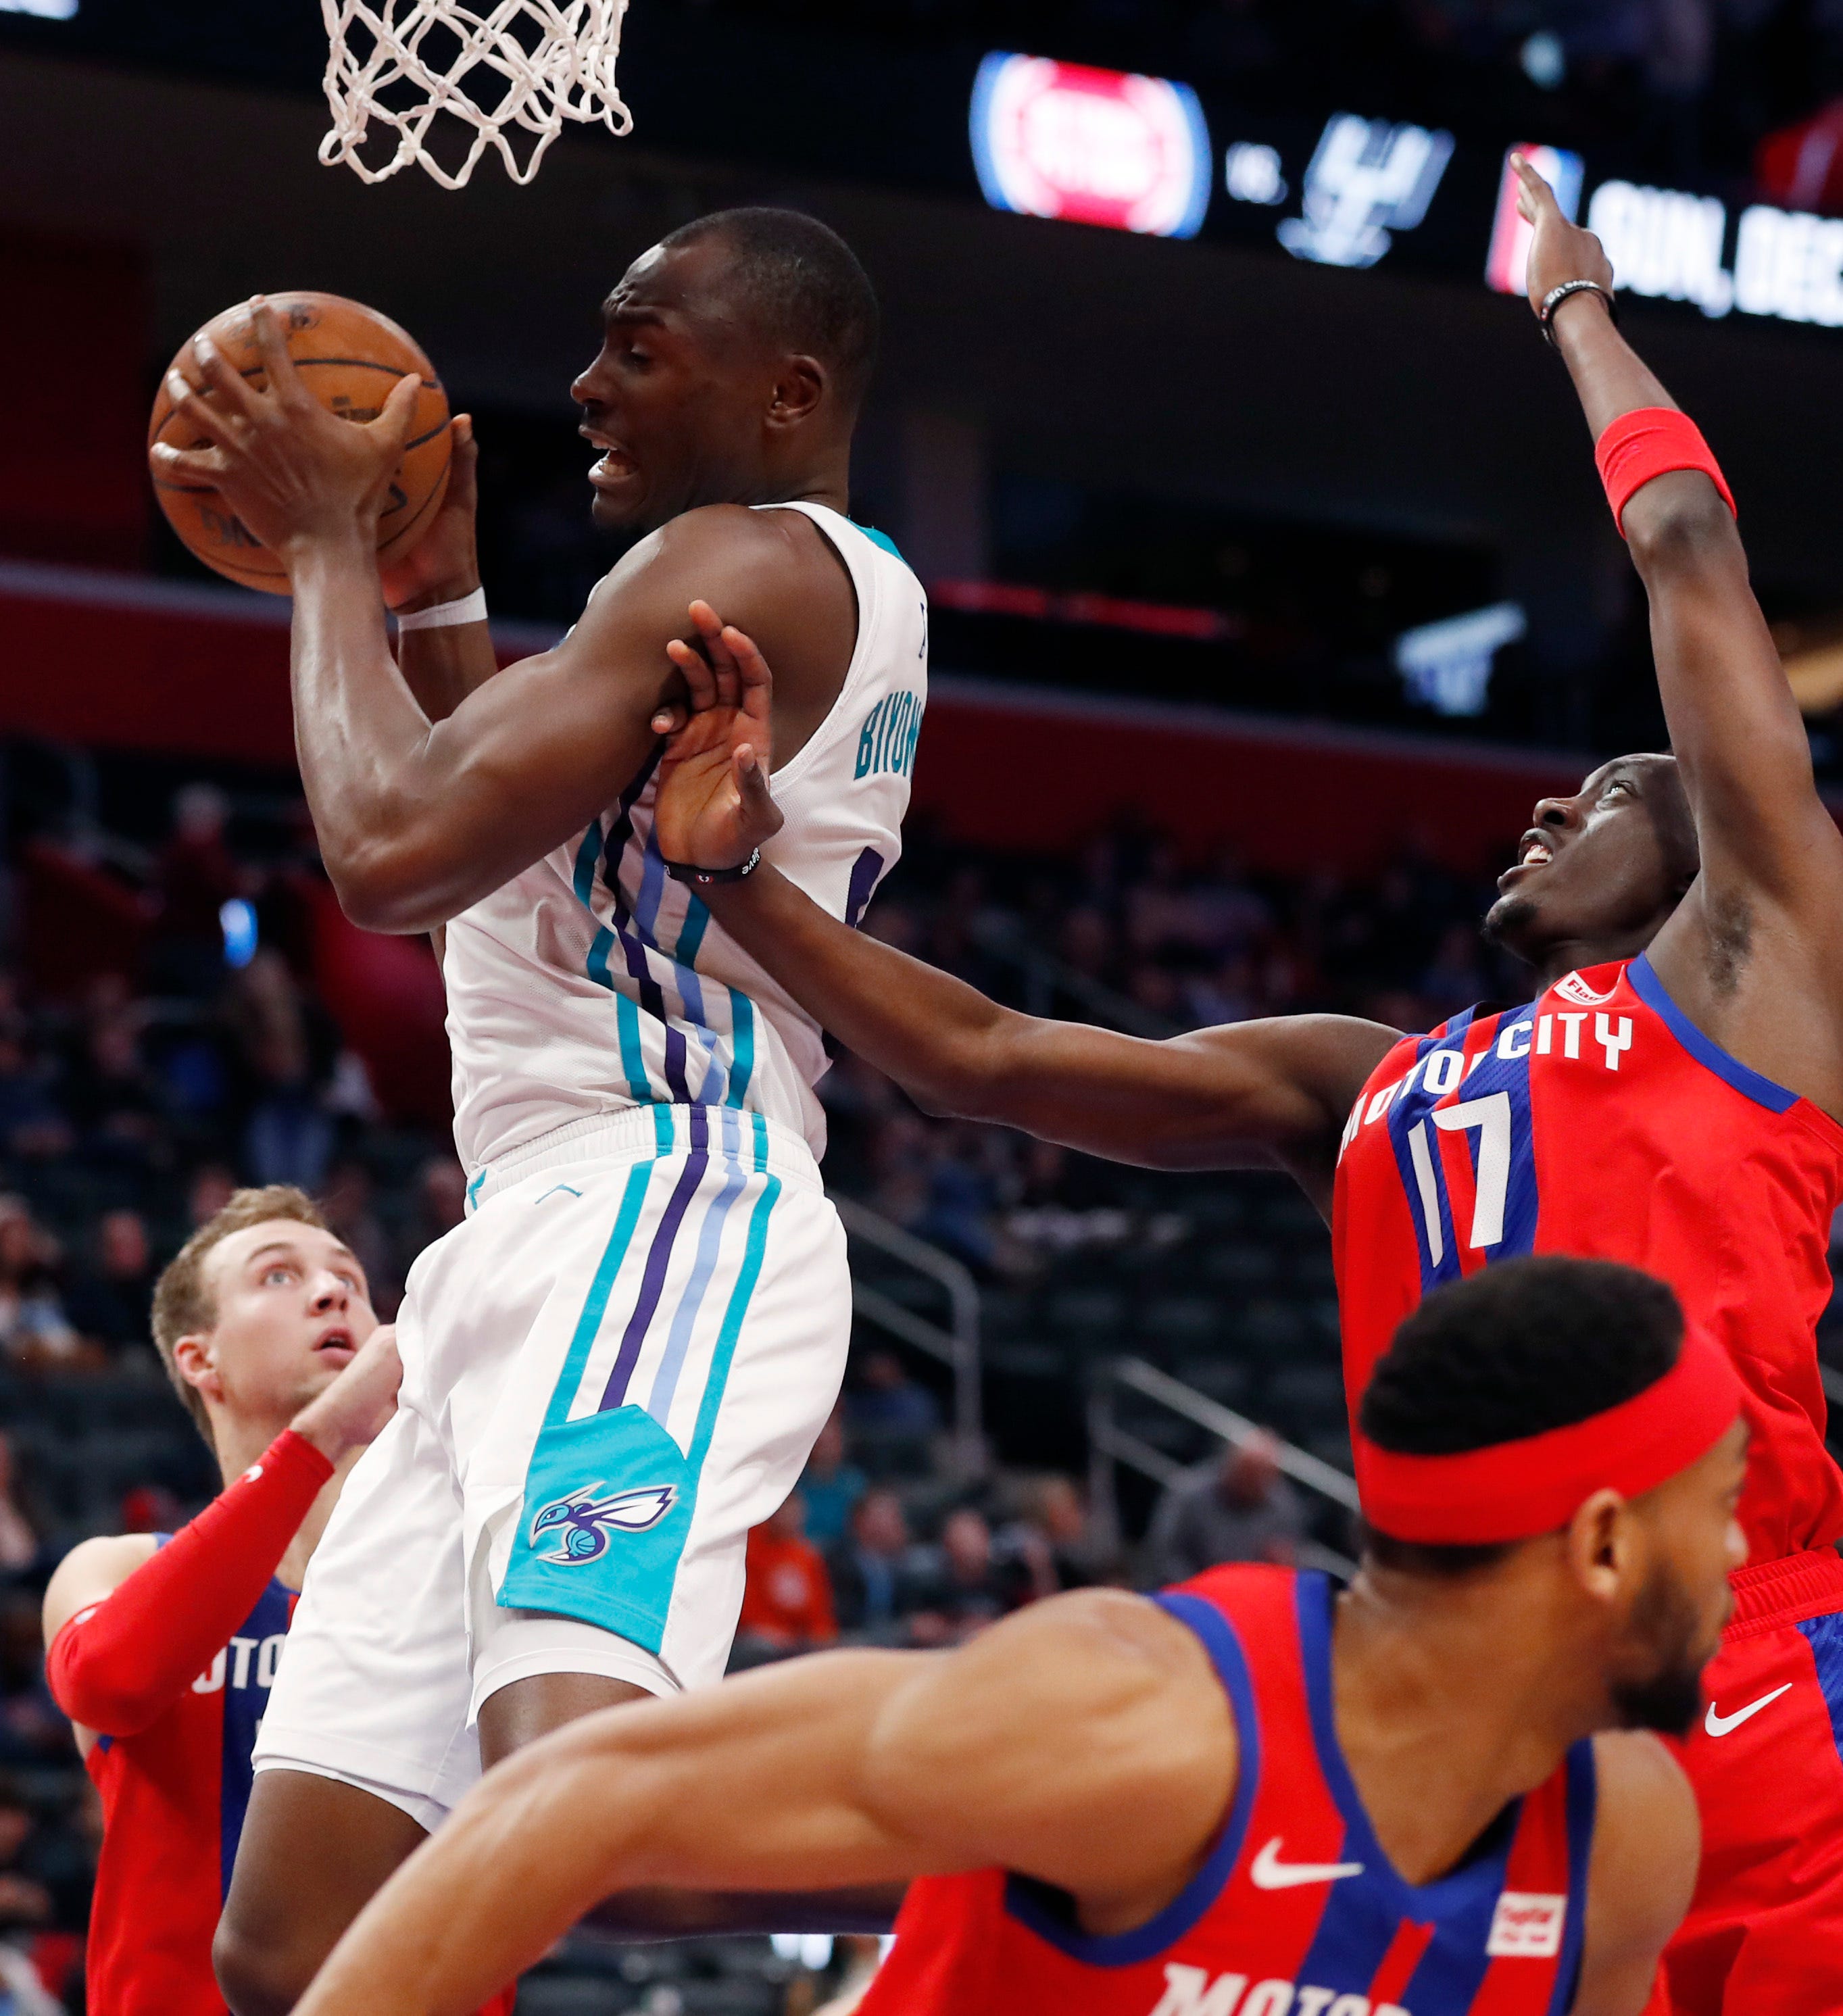 Hornets center Bismack Biyombo, top left, grabs a rebound next to Pistons guard Tony Snell.